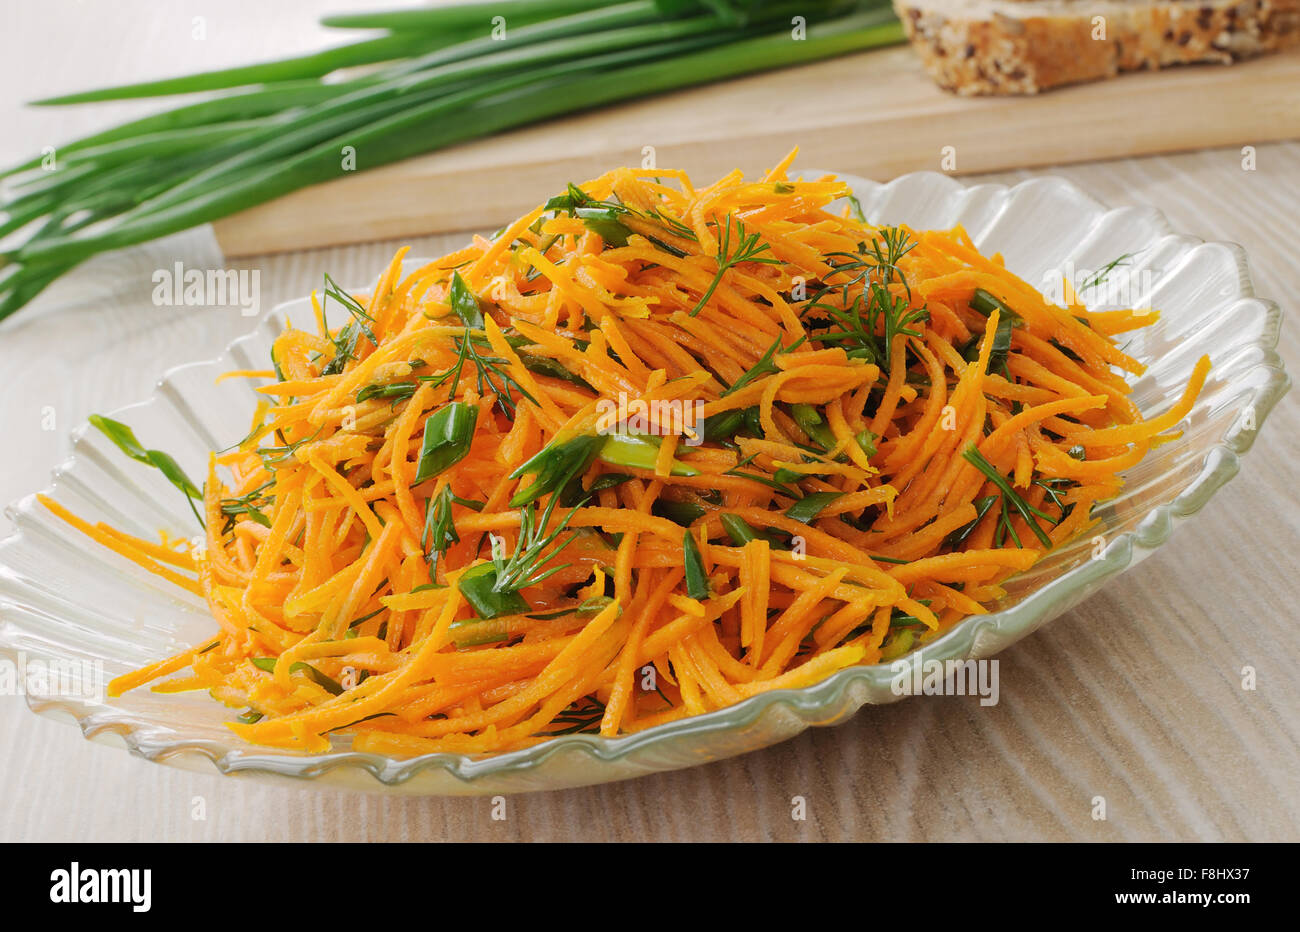 Carrot salad with green onion and dill Stock Photo